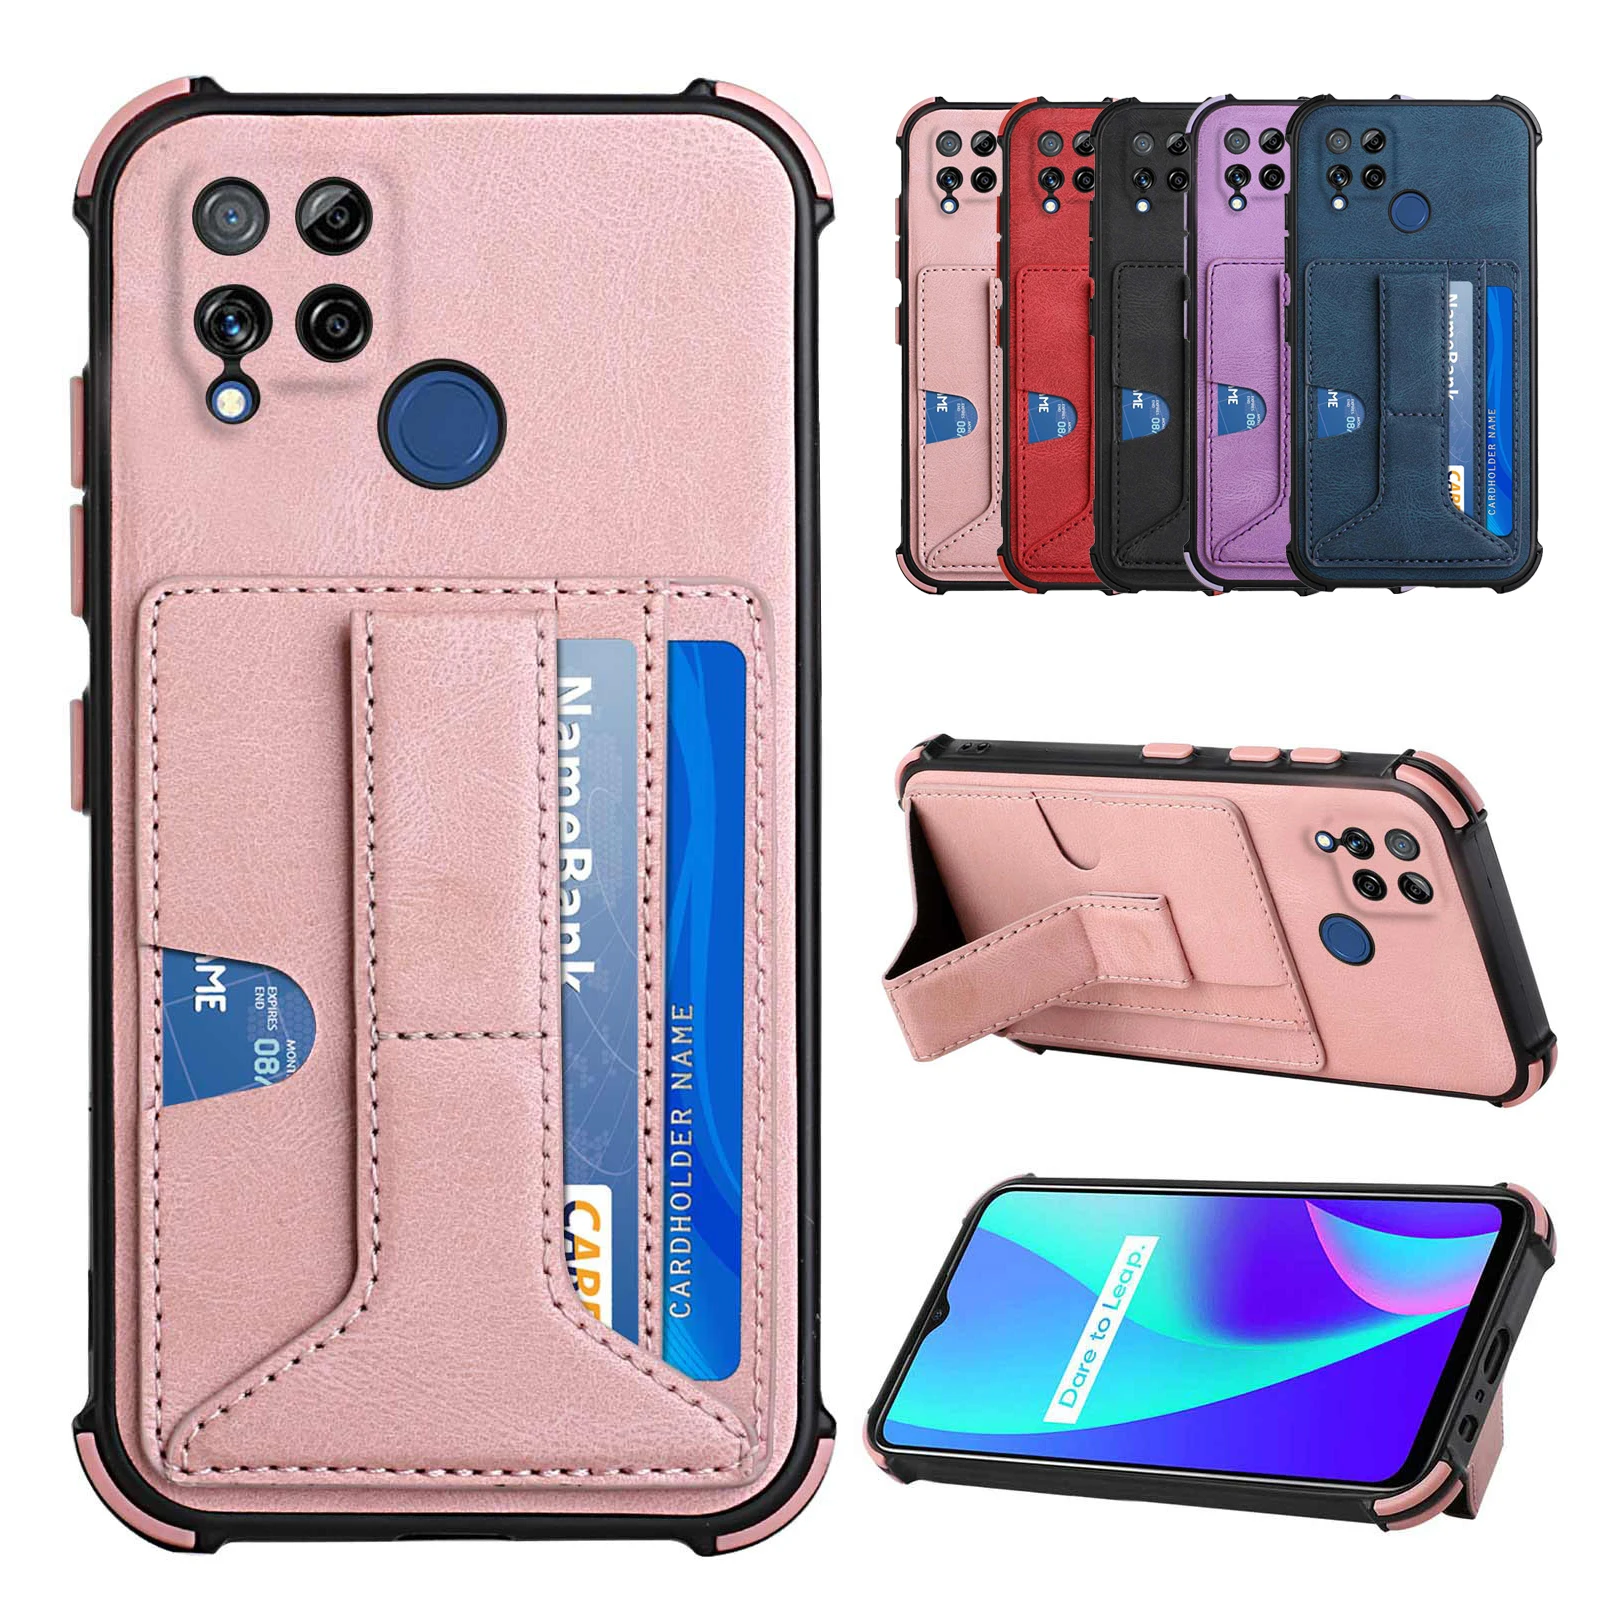 

Leather Case For Realme 5 8 Pro 7i C2 C3 C11 C12 C15 C17 C20 C21 C25 Narzo 20 30A Holder Card Slots Back Cover Stand Shockproof